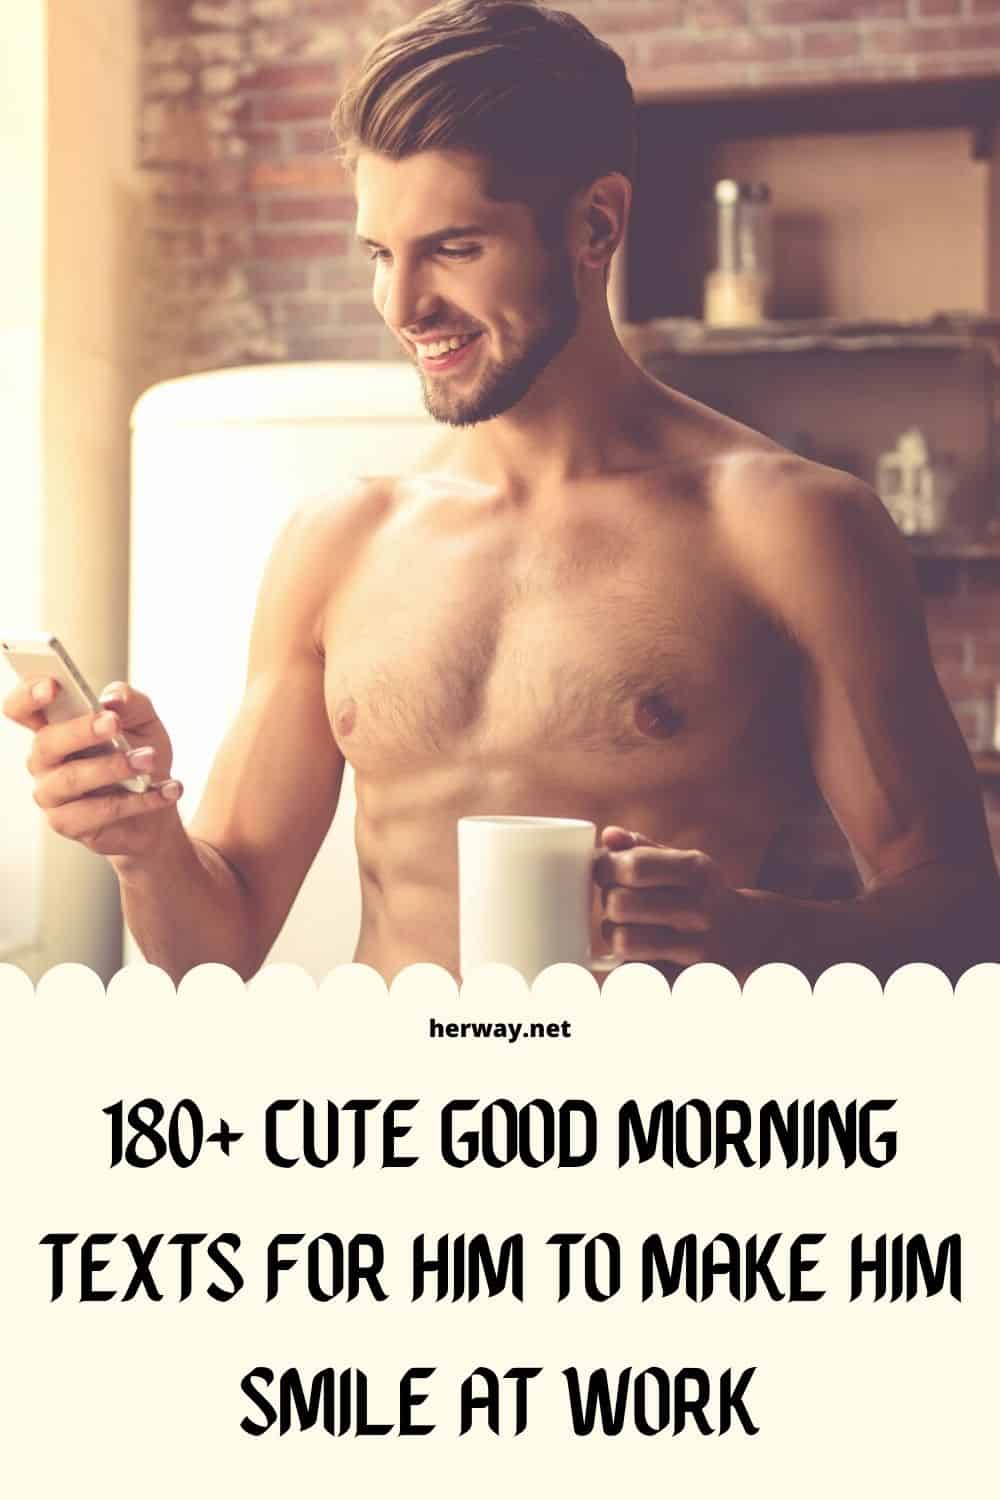 180+ Cute Good Morning Texts For Him To Make Him Smile At Work